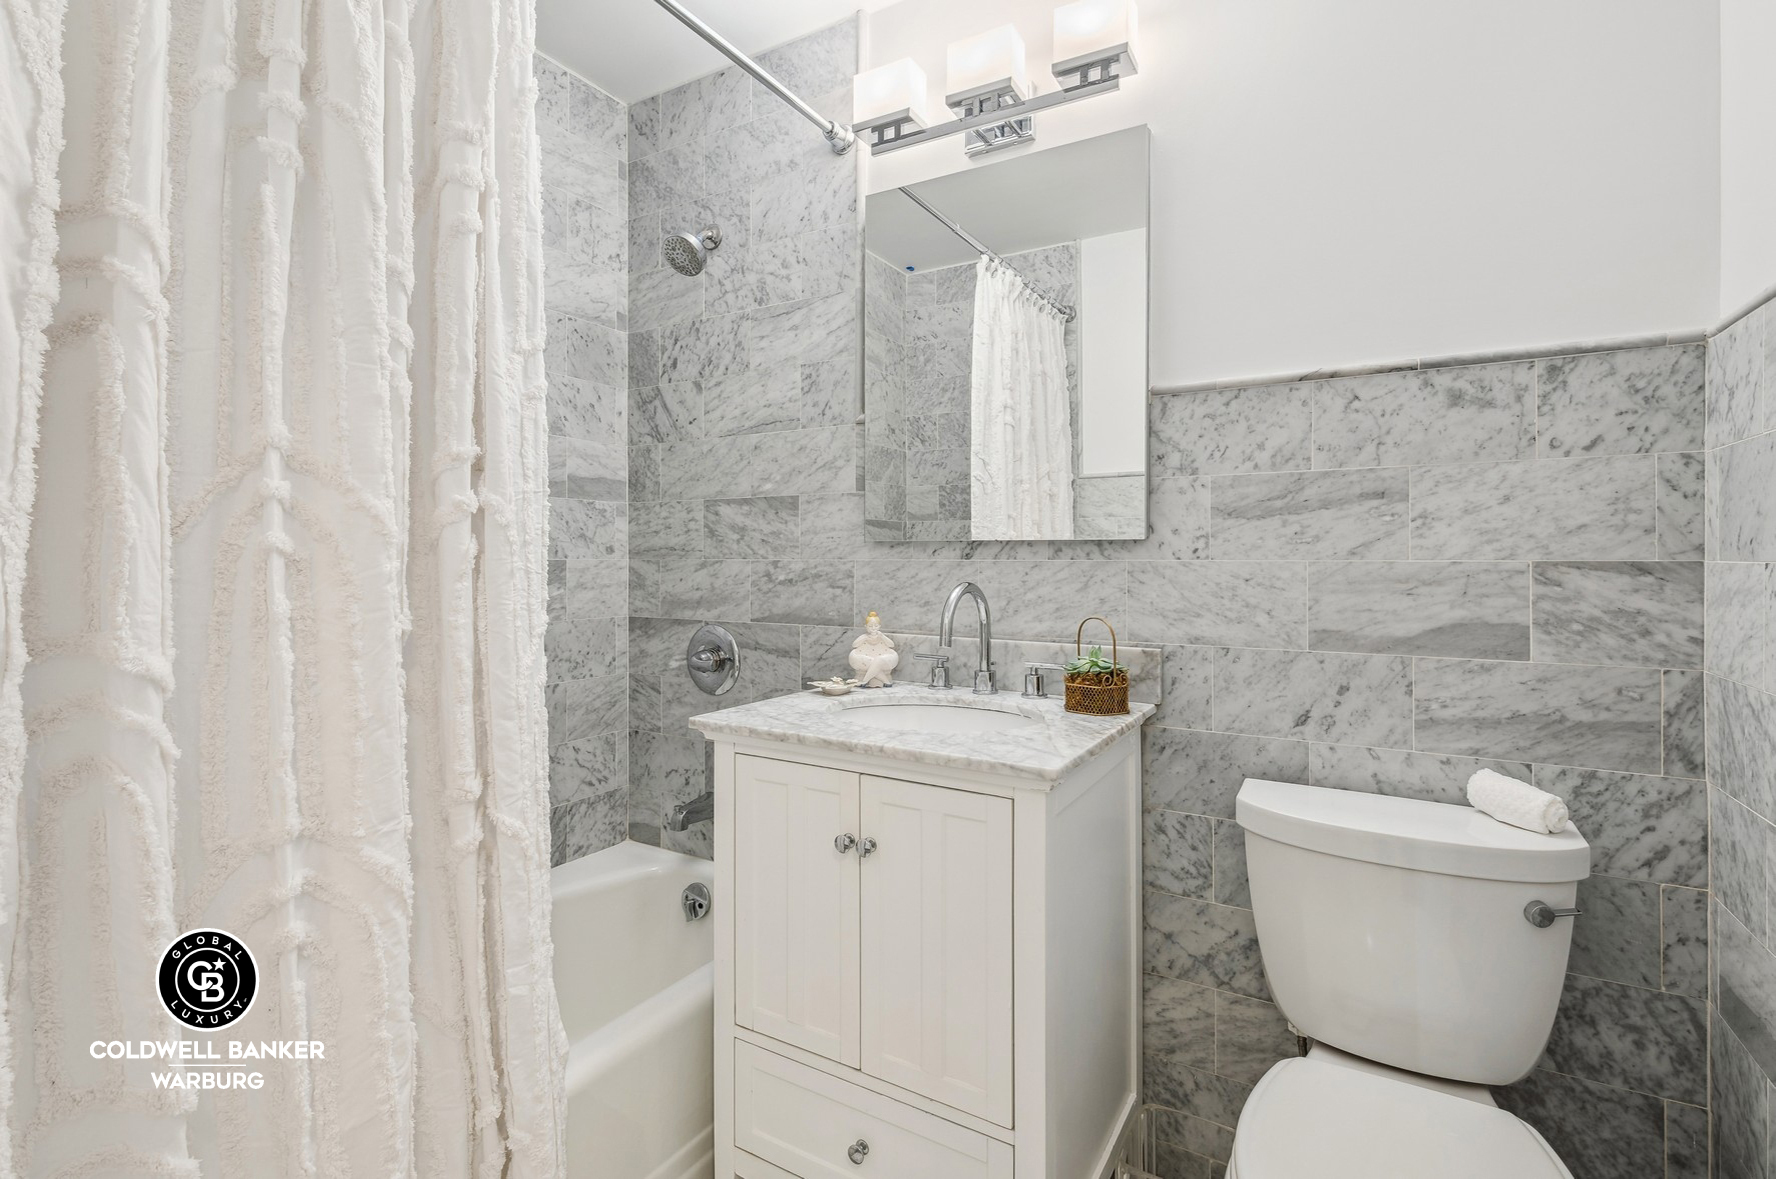 201 E 79th Street Unit 6H, New York, New York, 10075, United States, 2 Bedrooms Bedrooms, ,2 BathroomsBathrooms,Residential,For Sale,201 E 79th Street Unit 6H,1385294